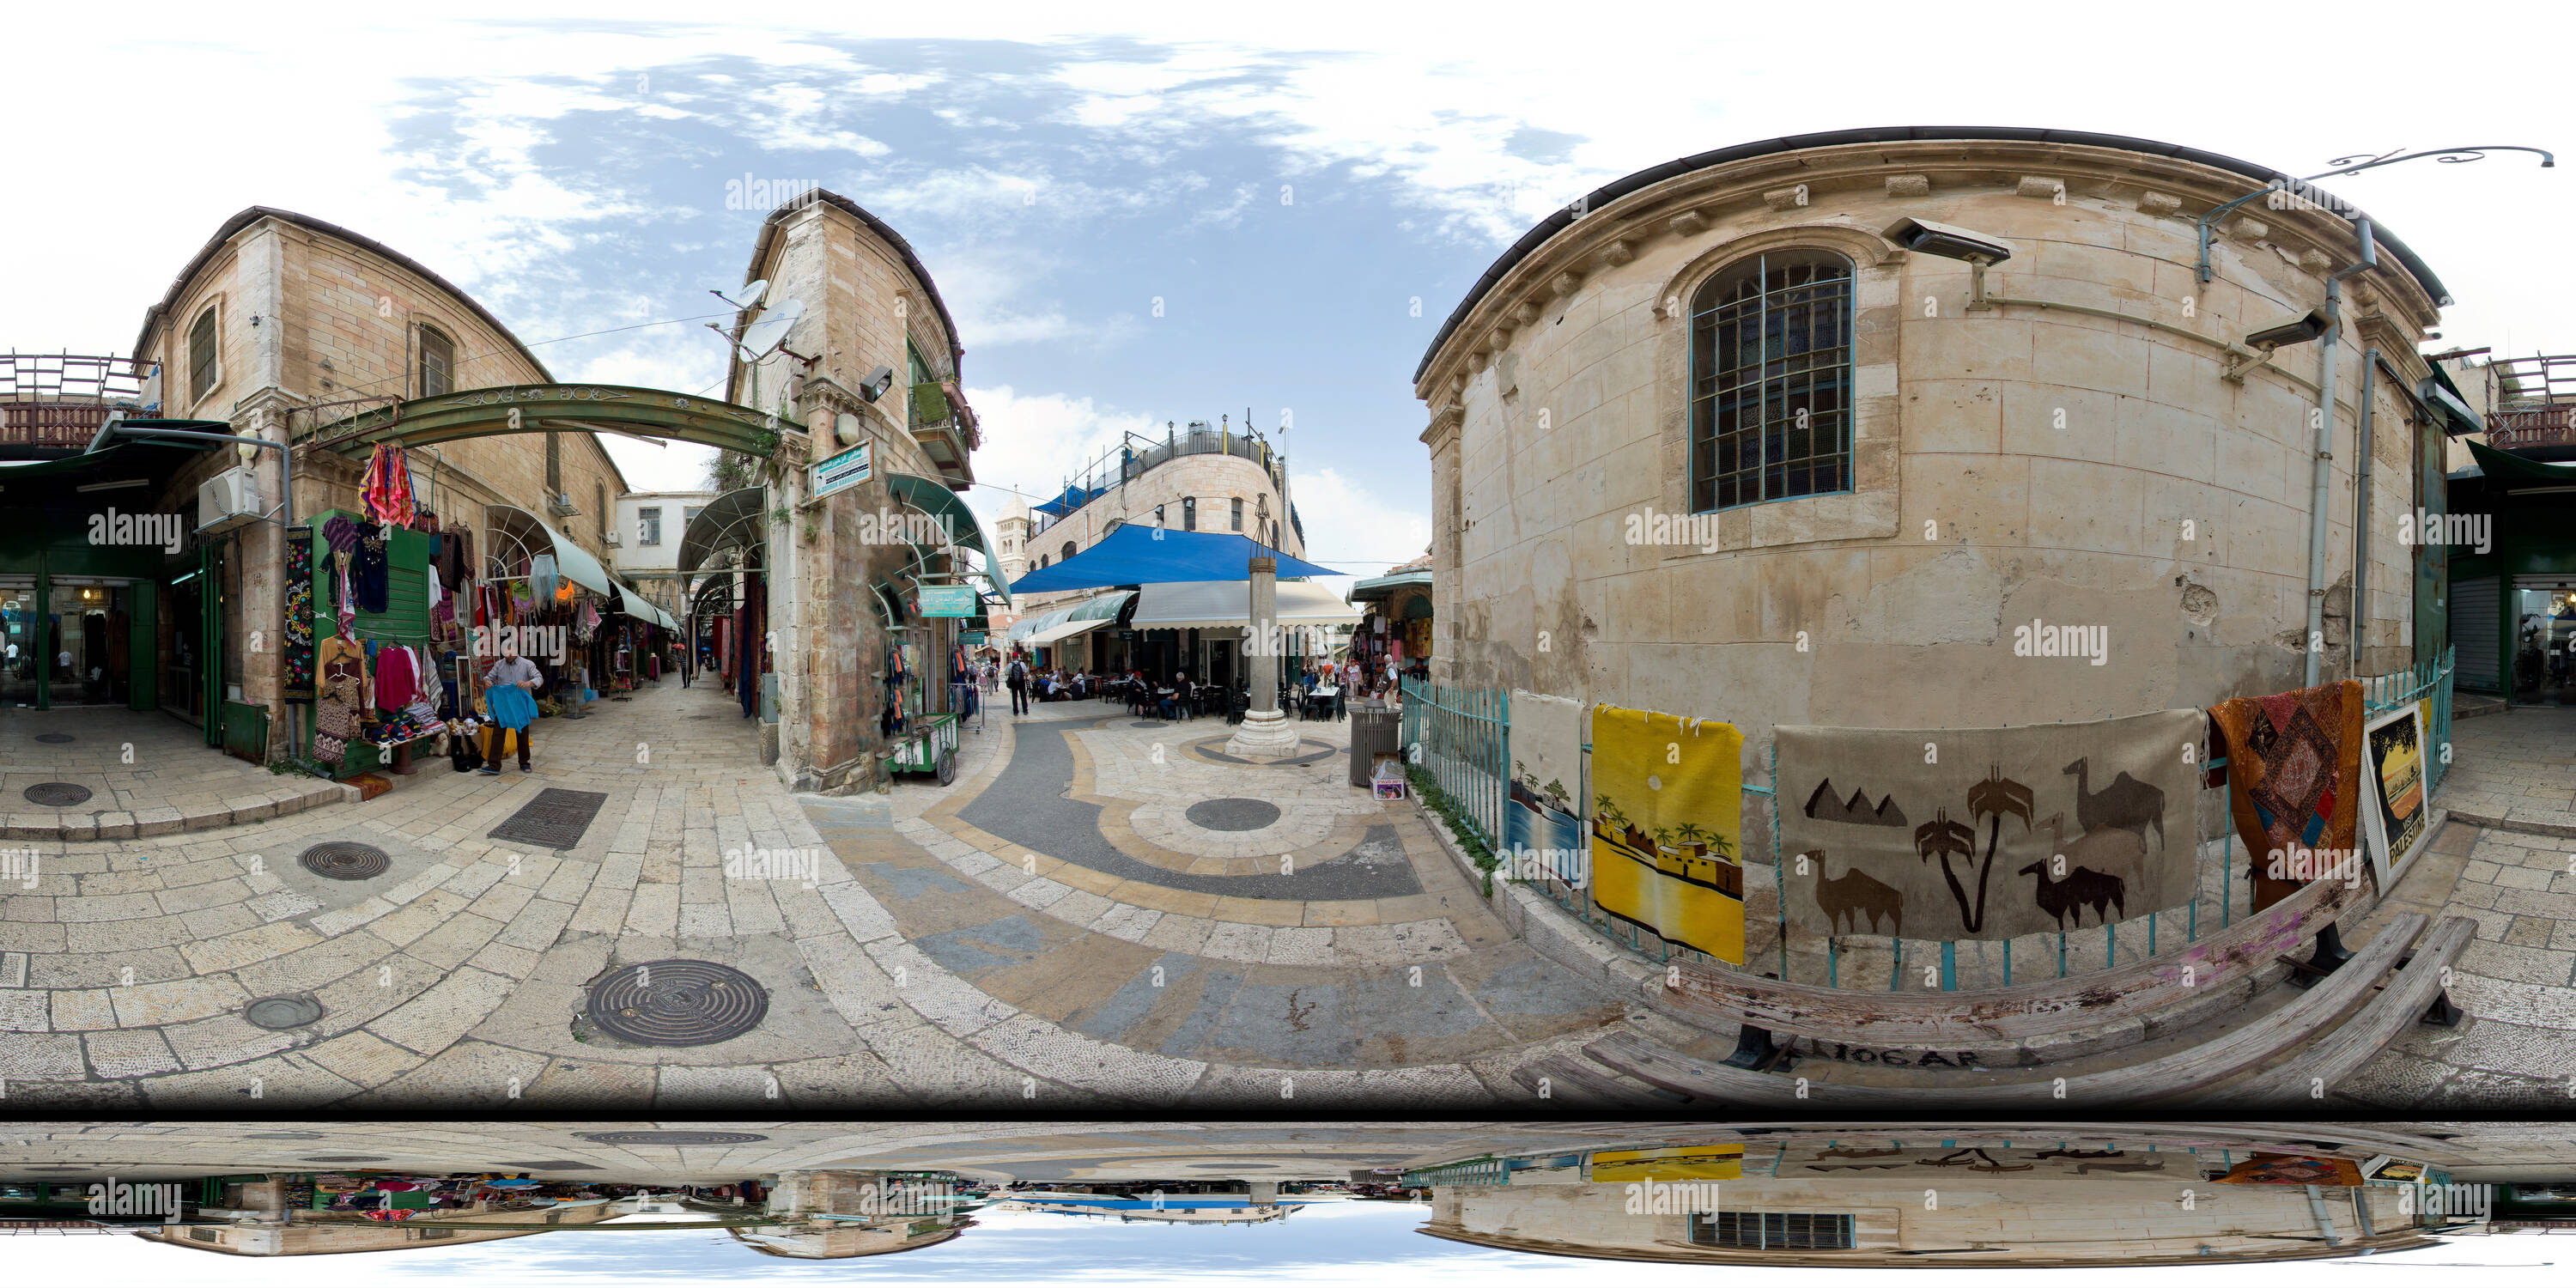 360 degree panoramic view of Old City Jerusalem, Early Afternoon (I), 2016-04, freehand